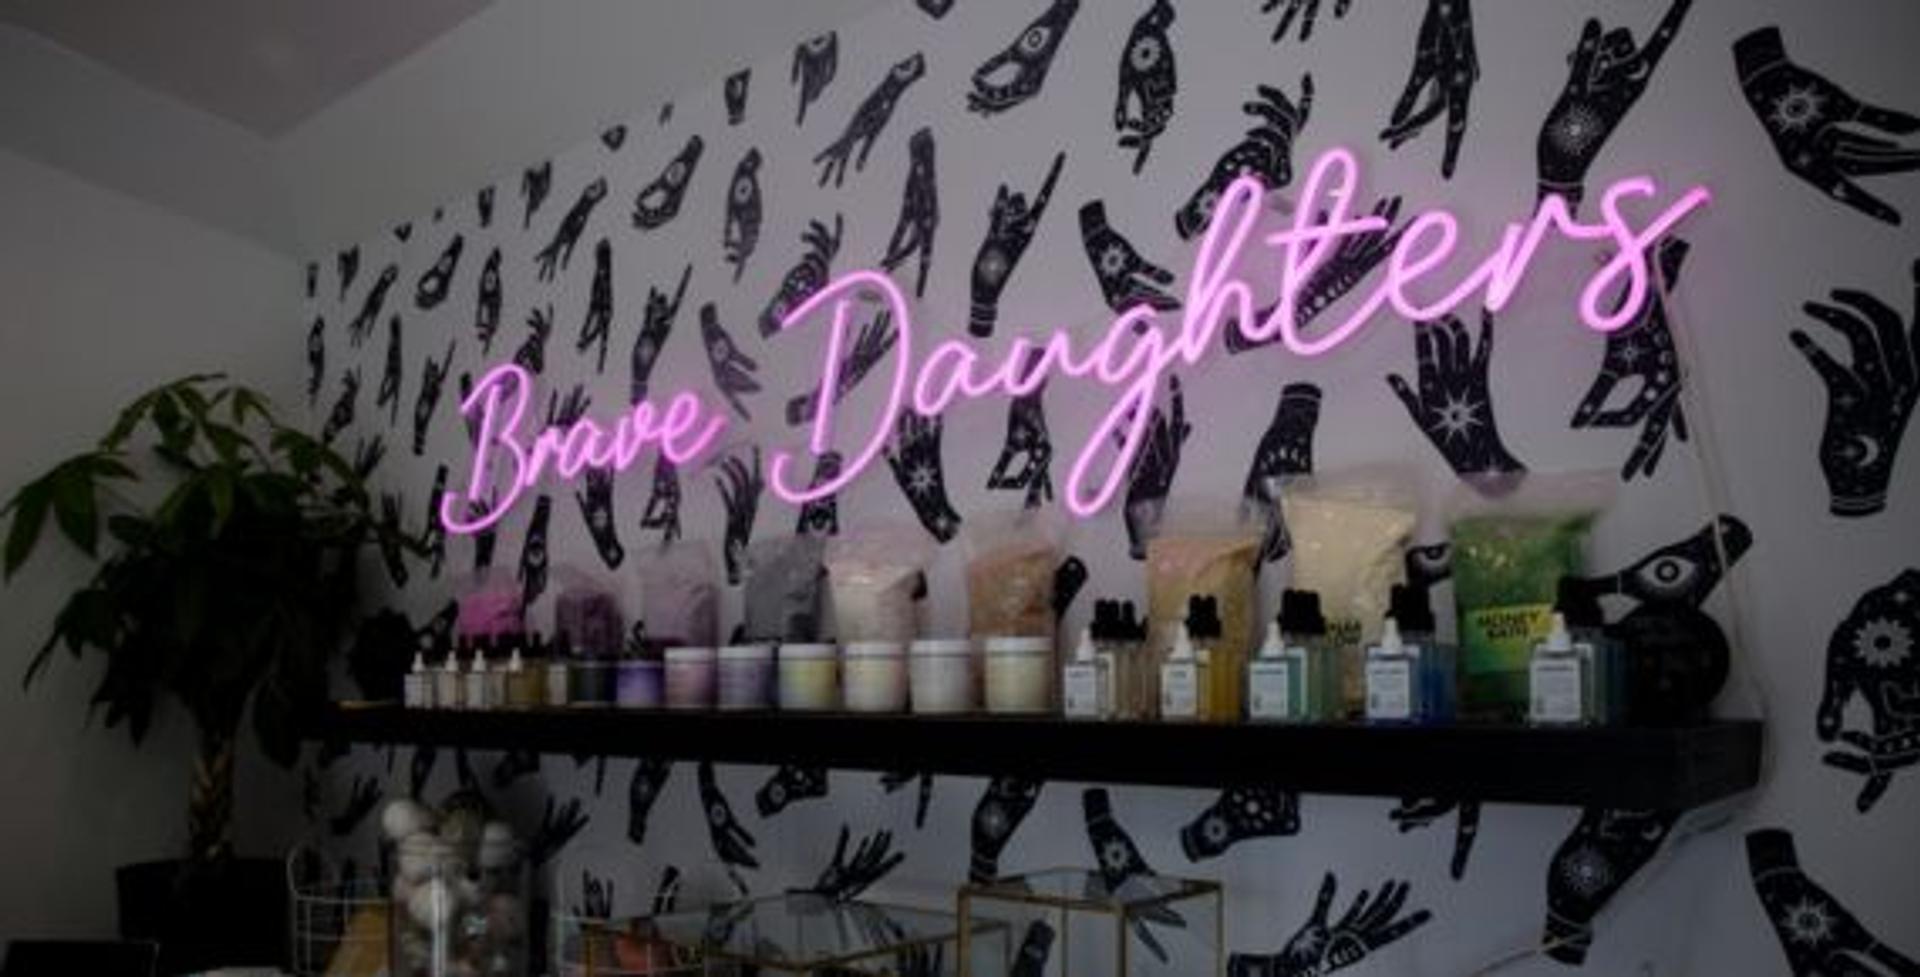 Brave Daughters: Mother's Day Engraving Event